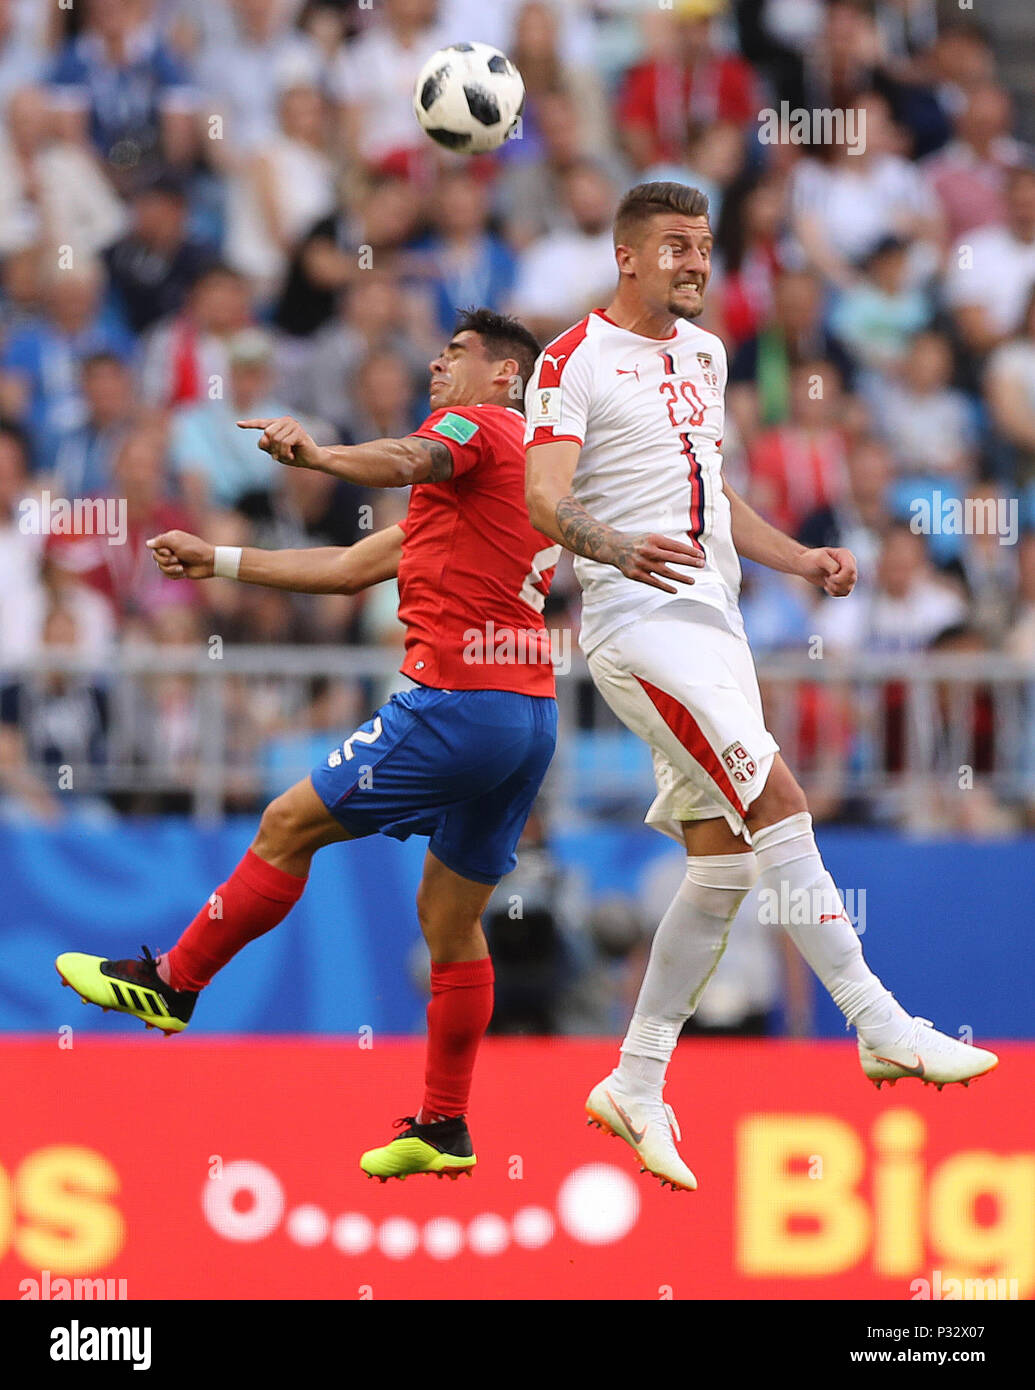 Samara, Russia. 17th June, 2018. Sergej Milinkovic-Savic (R) of Serbia vies with Johnny Acosta of Costa Rica during a group E match between Costa Rica and Serbia at the 2018 FIFA World Cup in Samara, Russia, June 17, 2018. Serbia won 1-0. Credit: Fei Maohua/Xinhua/Alamy Live News Stock Photo